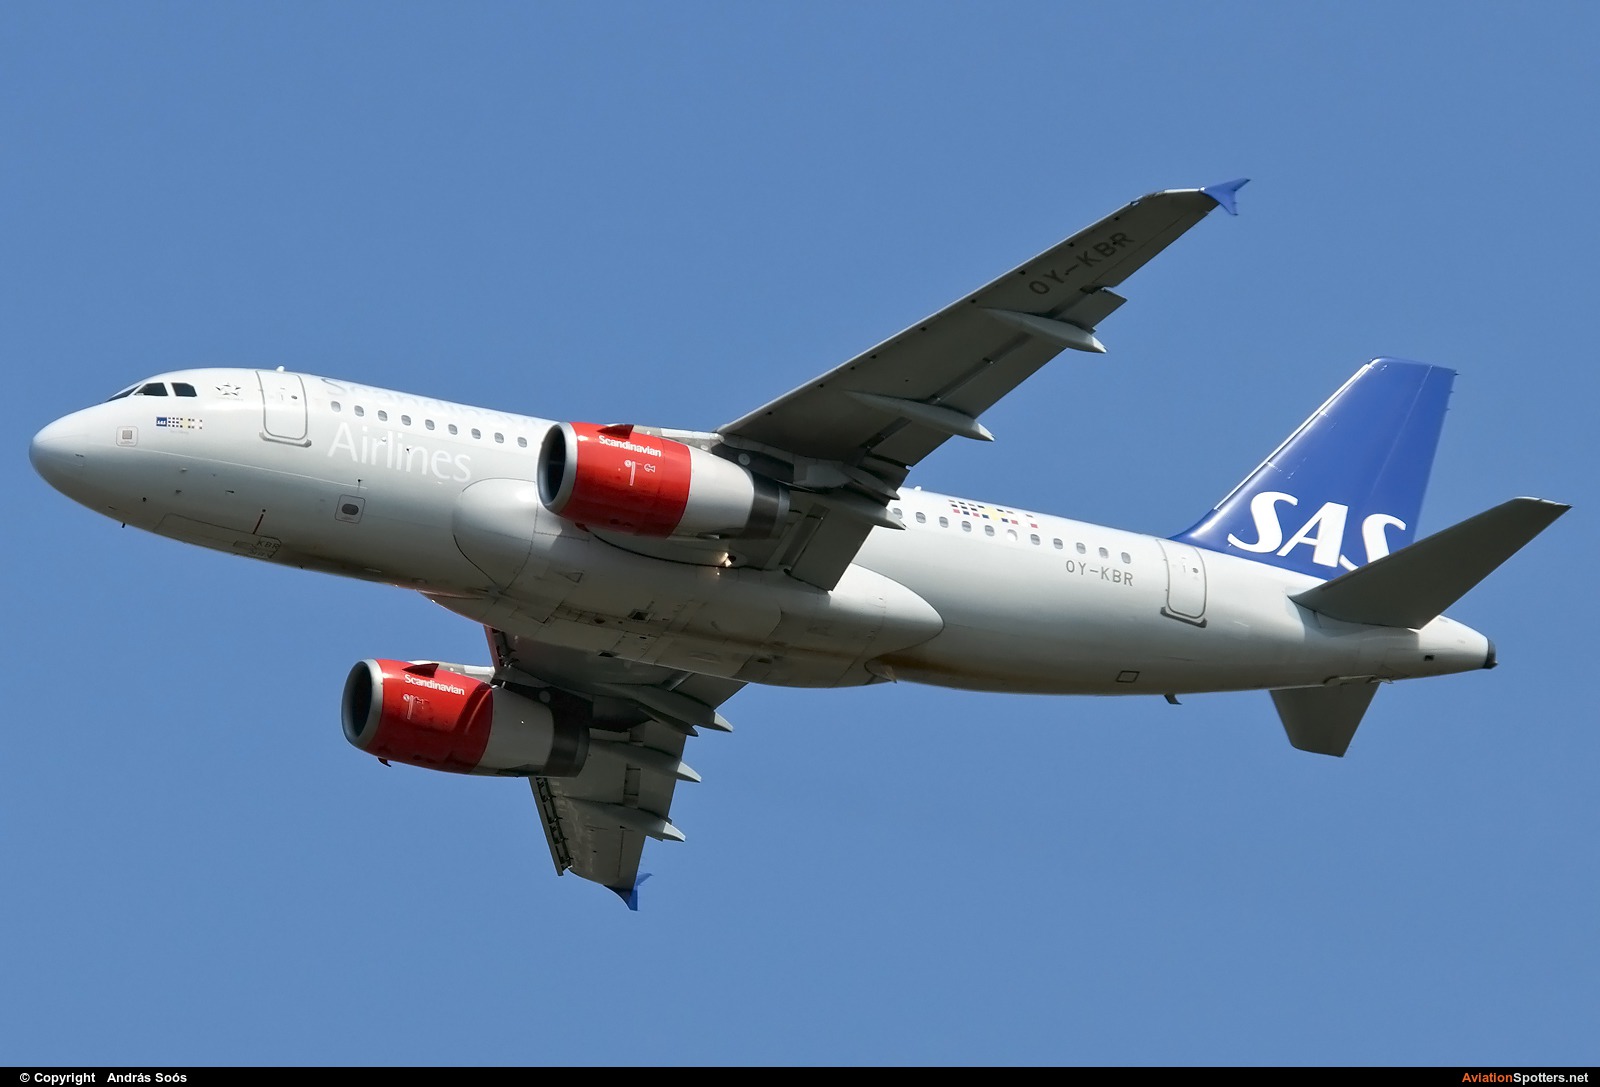 SAS - Scandinavian Airlines  -  A319  (OY-KBR) By András Soós (sas1965)